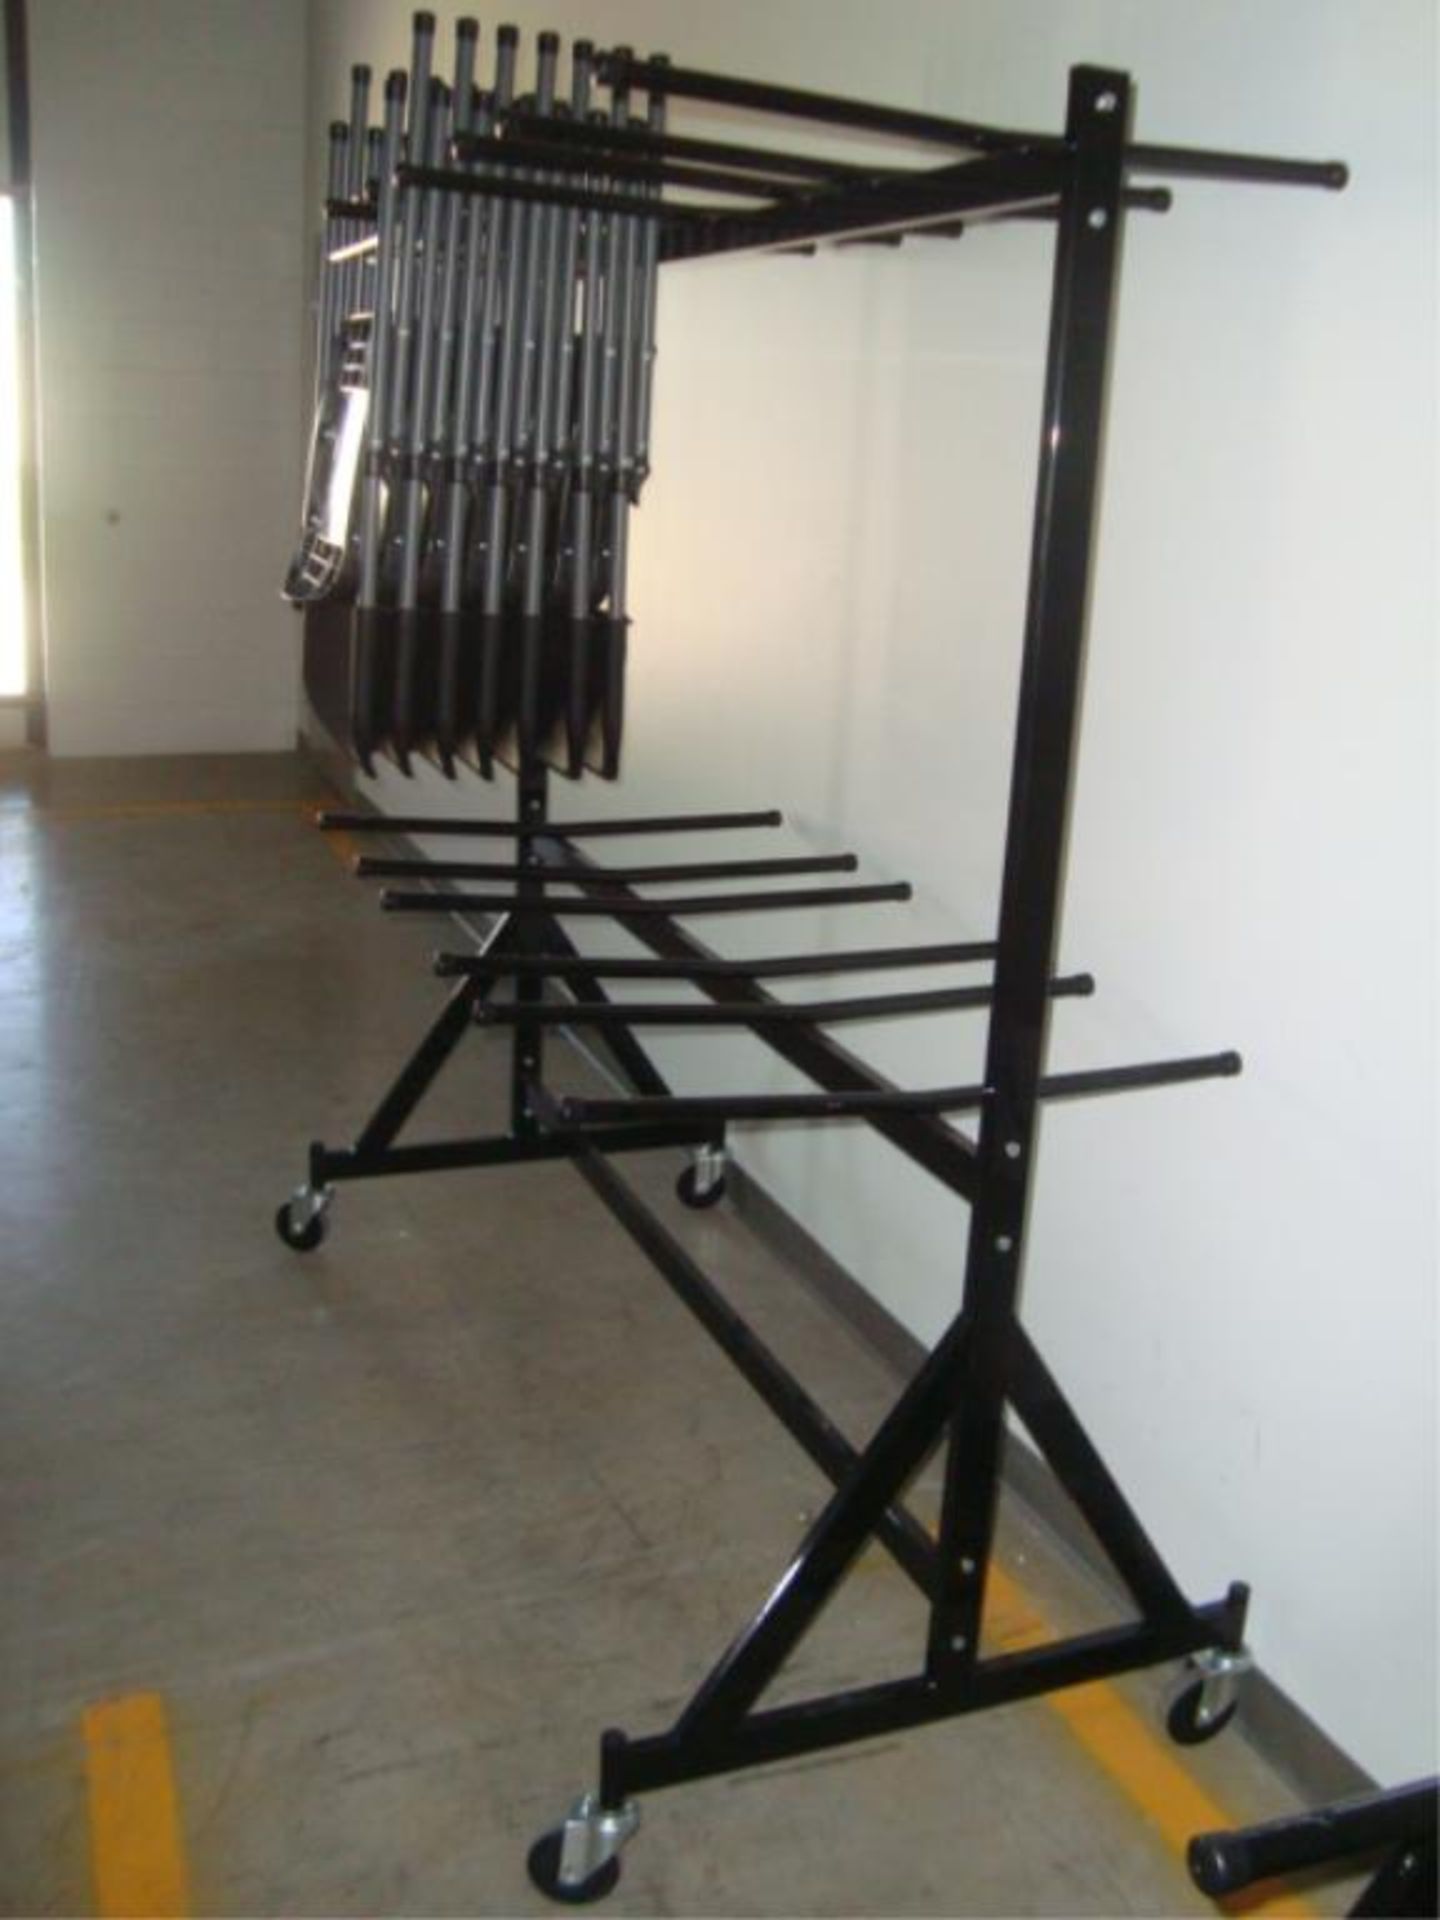 Stacking Chairs With Cart - Image 7 of 7